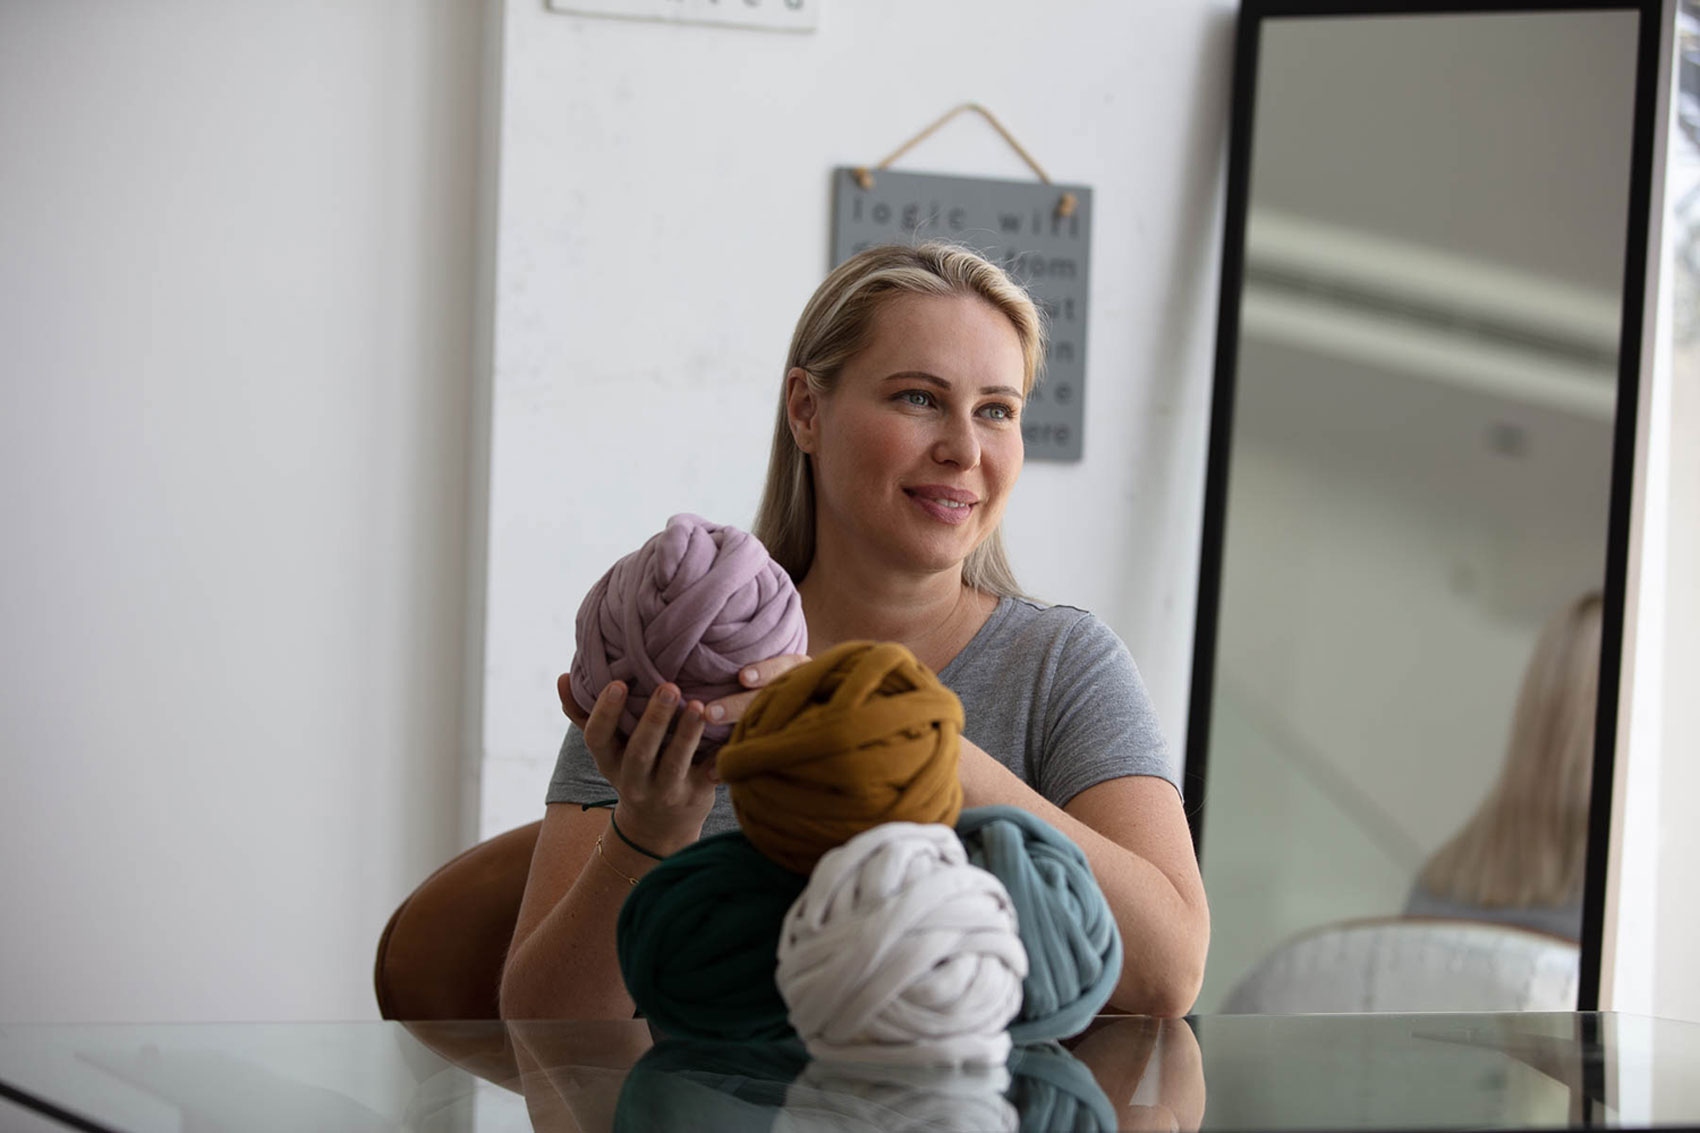 Horizontal image of a blonde-haired woman in a gray t-shirt sitting down at a table and looking to the side of the camera while holding a large ball of light pink/lavender yarn in her hands. Resting on the table in front of her are four other balls of yarn stacked in a pyramid with a mustard yellow one on top, a dark turquoise one to the left, an off-white one in the middle and a blue/gray one to the right. A white wall sits in the background with a gray, square painting hanging on it and a large full-length mirror resting to the side. 